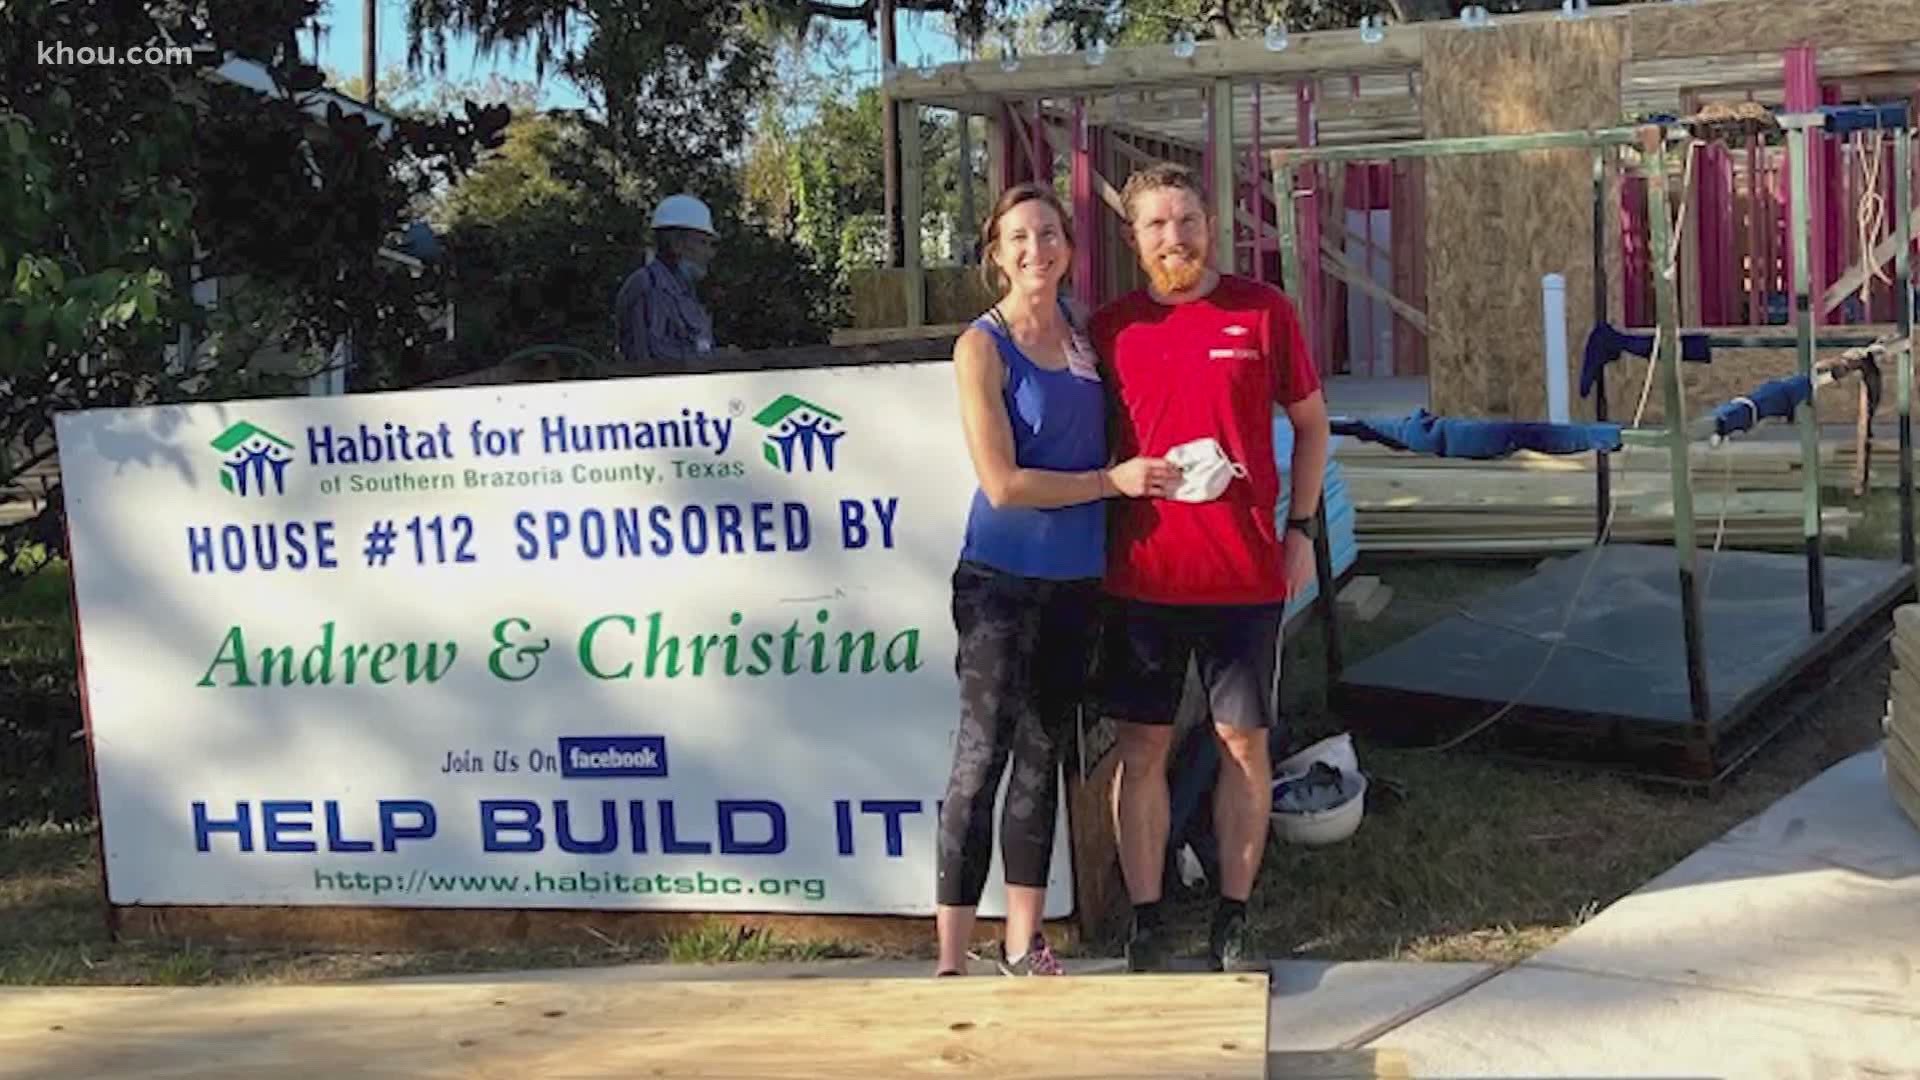 The couple set up a GoFundMe page for friends to give money directly to Habitat for Humanity of Southern Brazoria County and raised about $8,000.